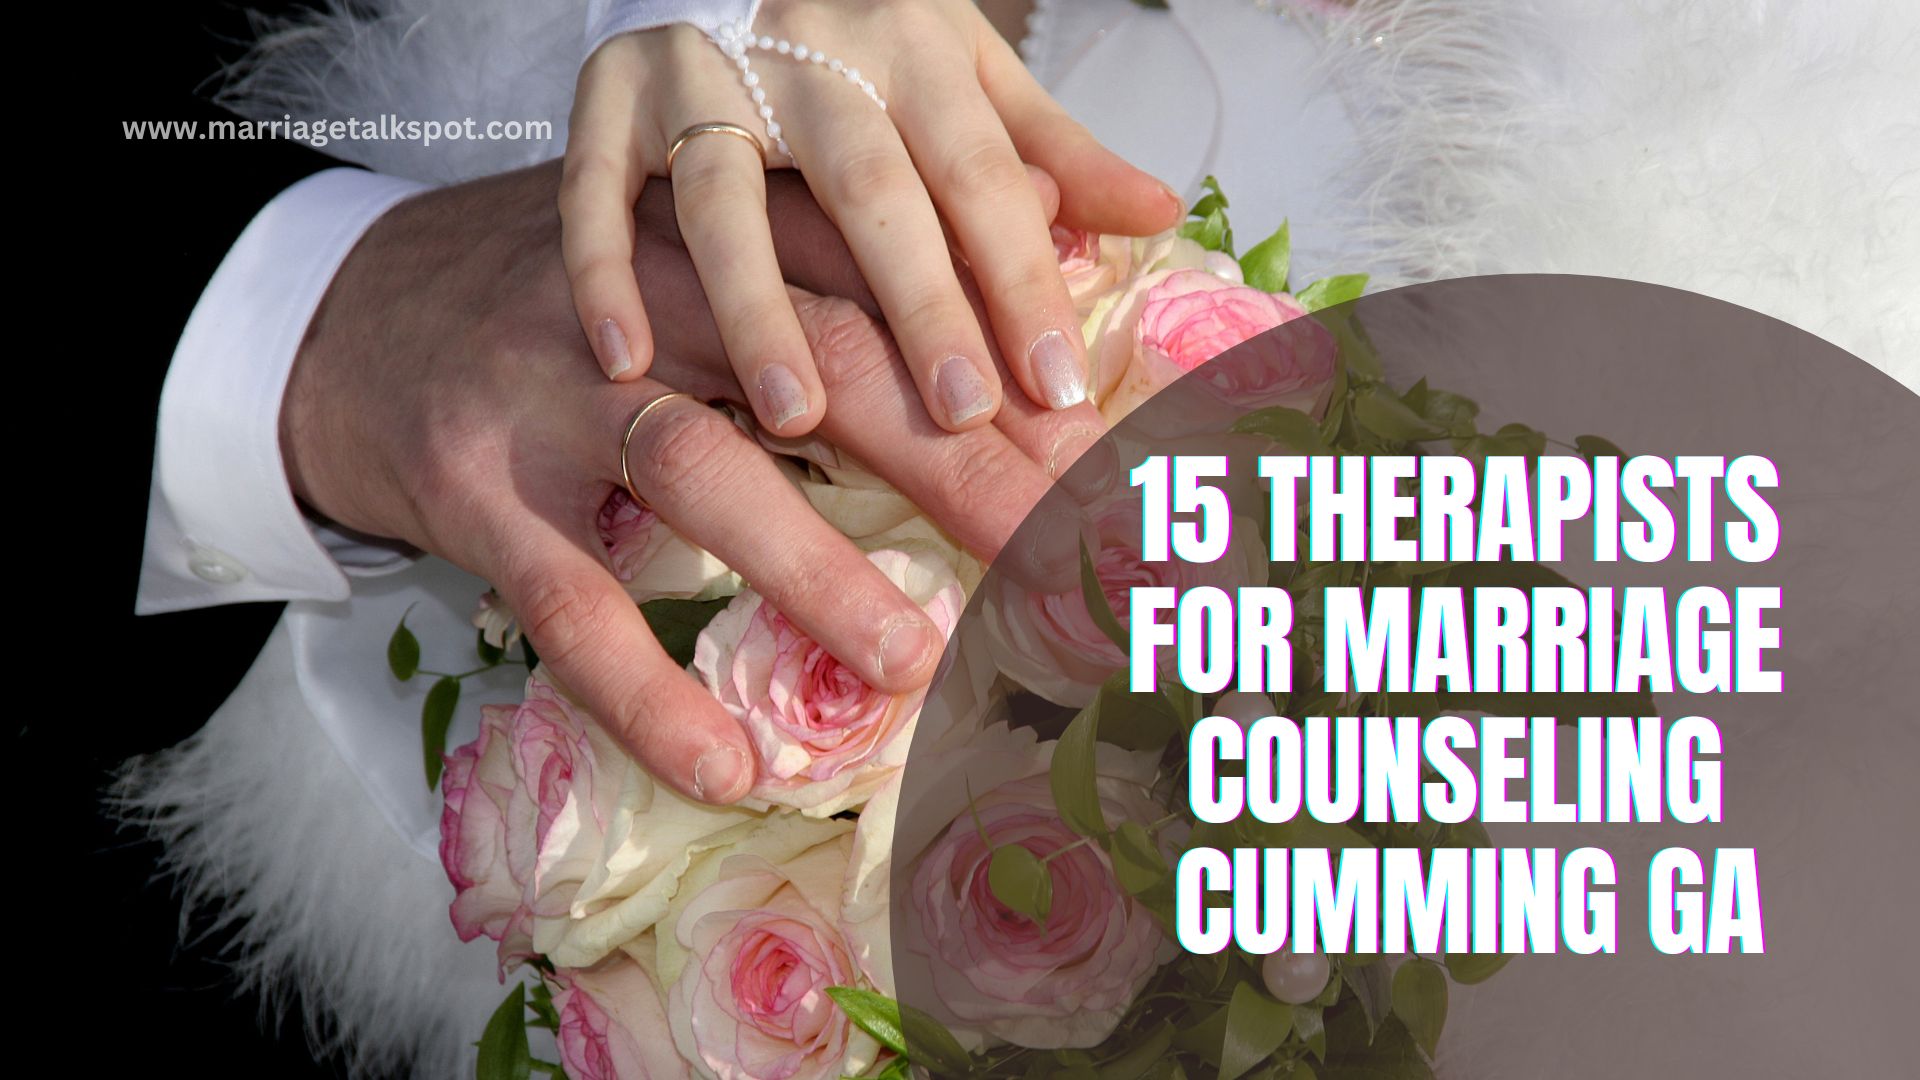 15 THERAPISTS FOR MARRIAGE COUNSELING CUMMING GA